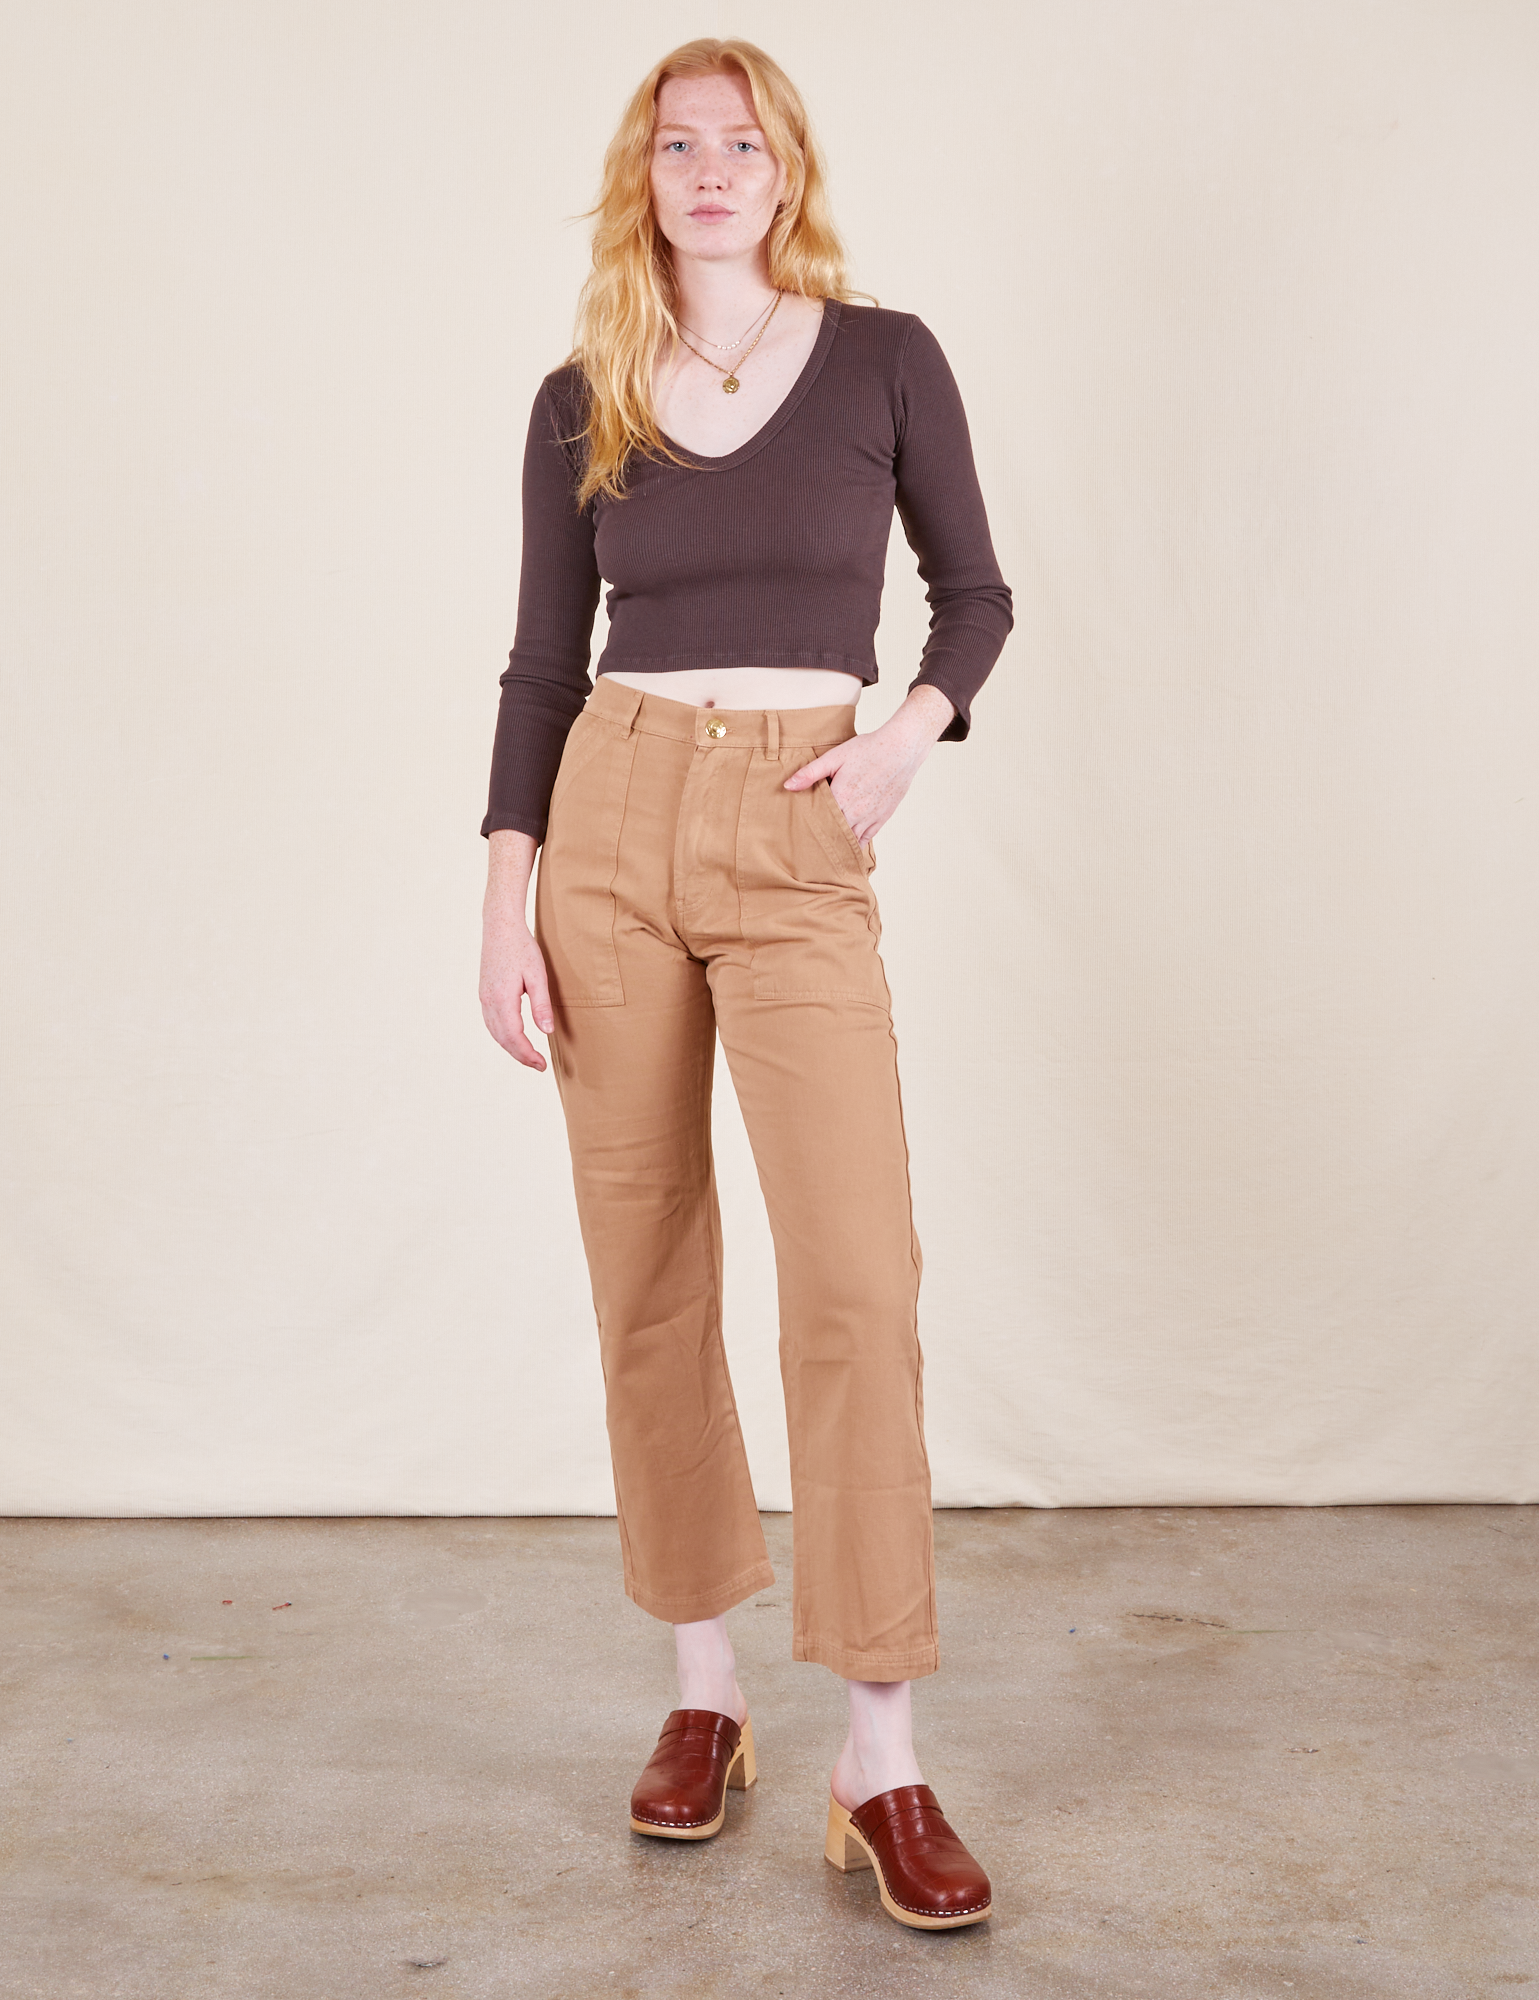 Margaret is 5&#39;11&quot; and wearing XXS Work Pants in Tan paired with espresso brown Long Sleeve V-Neck Tee